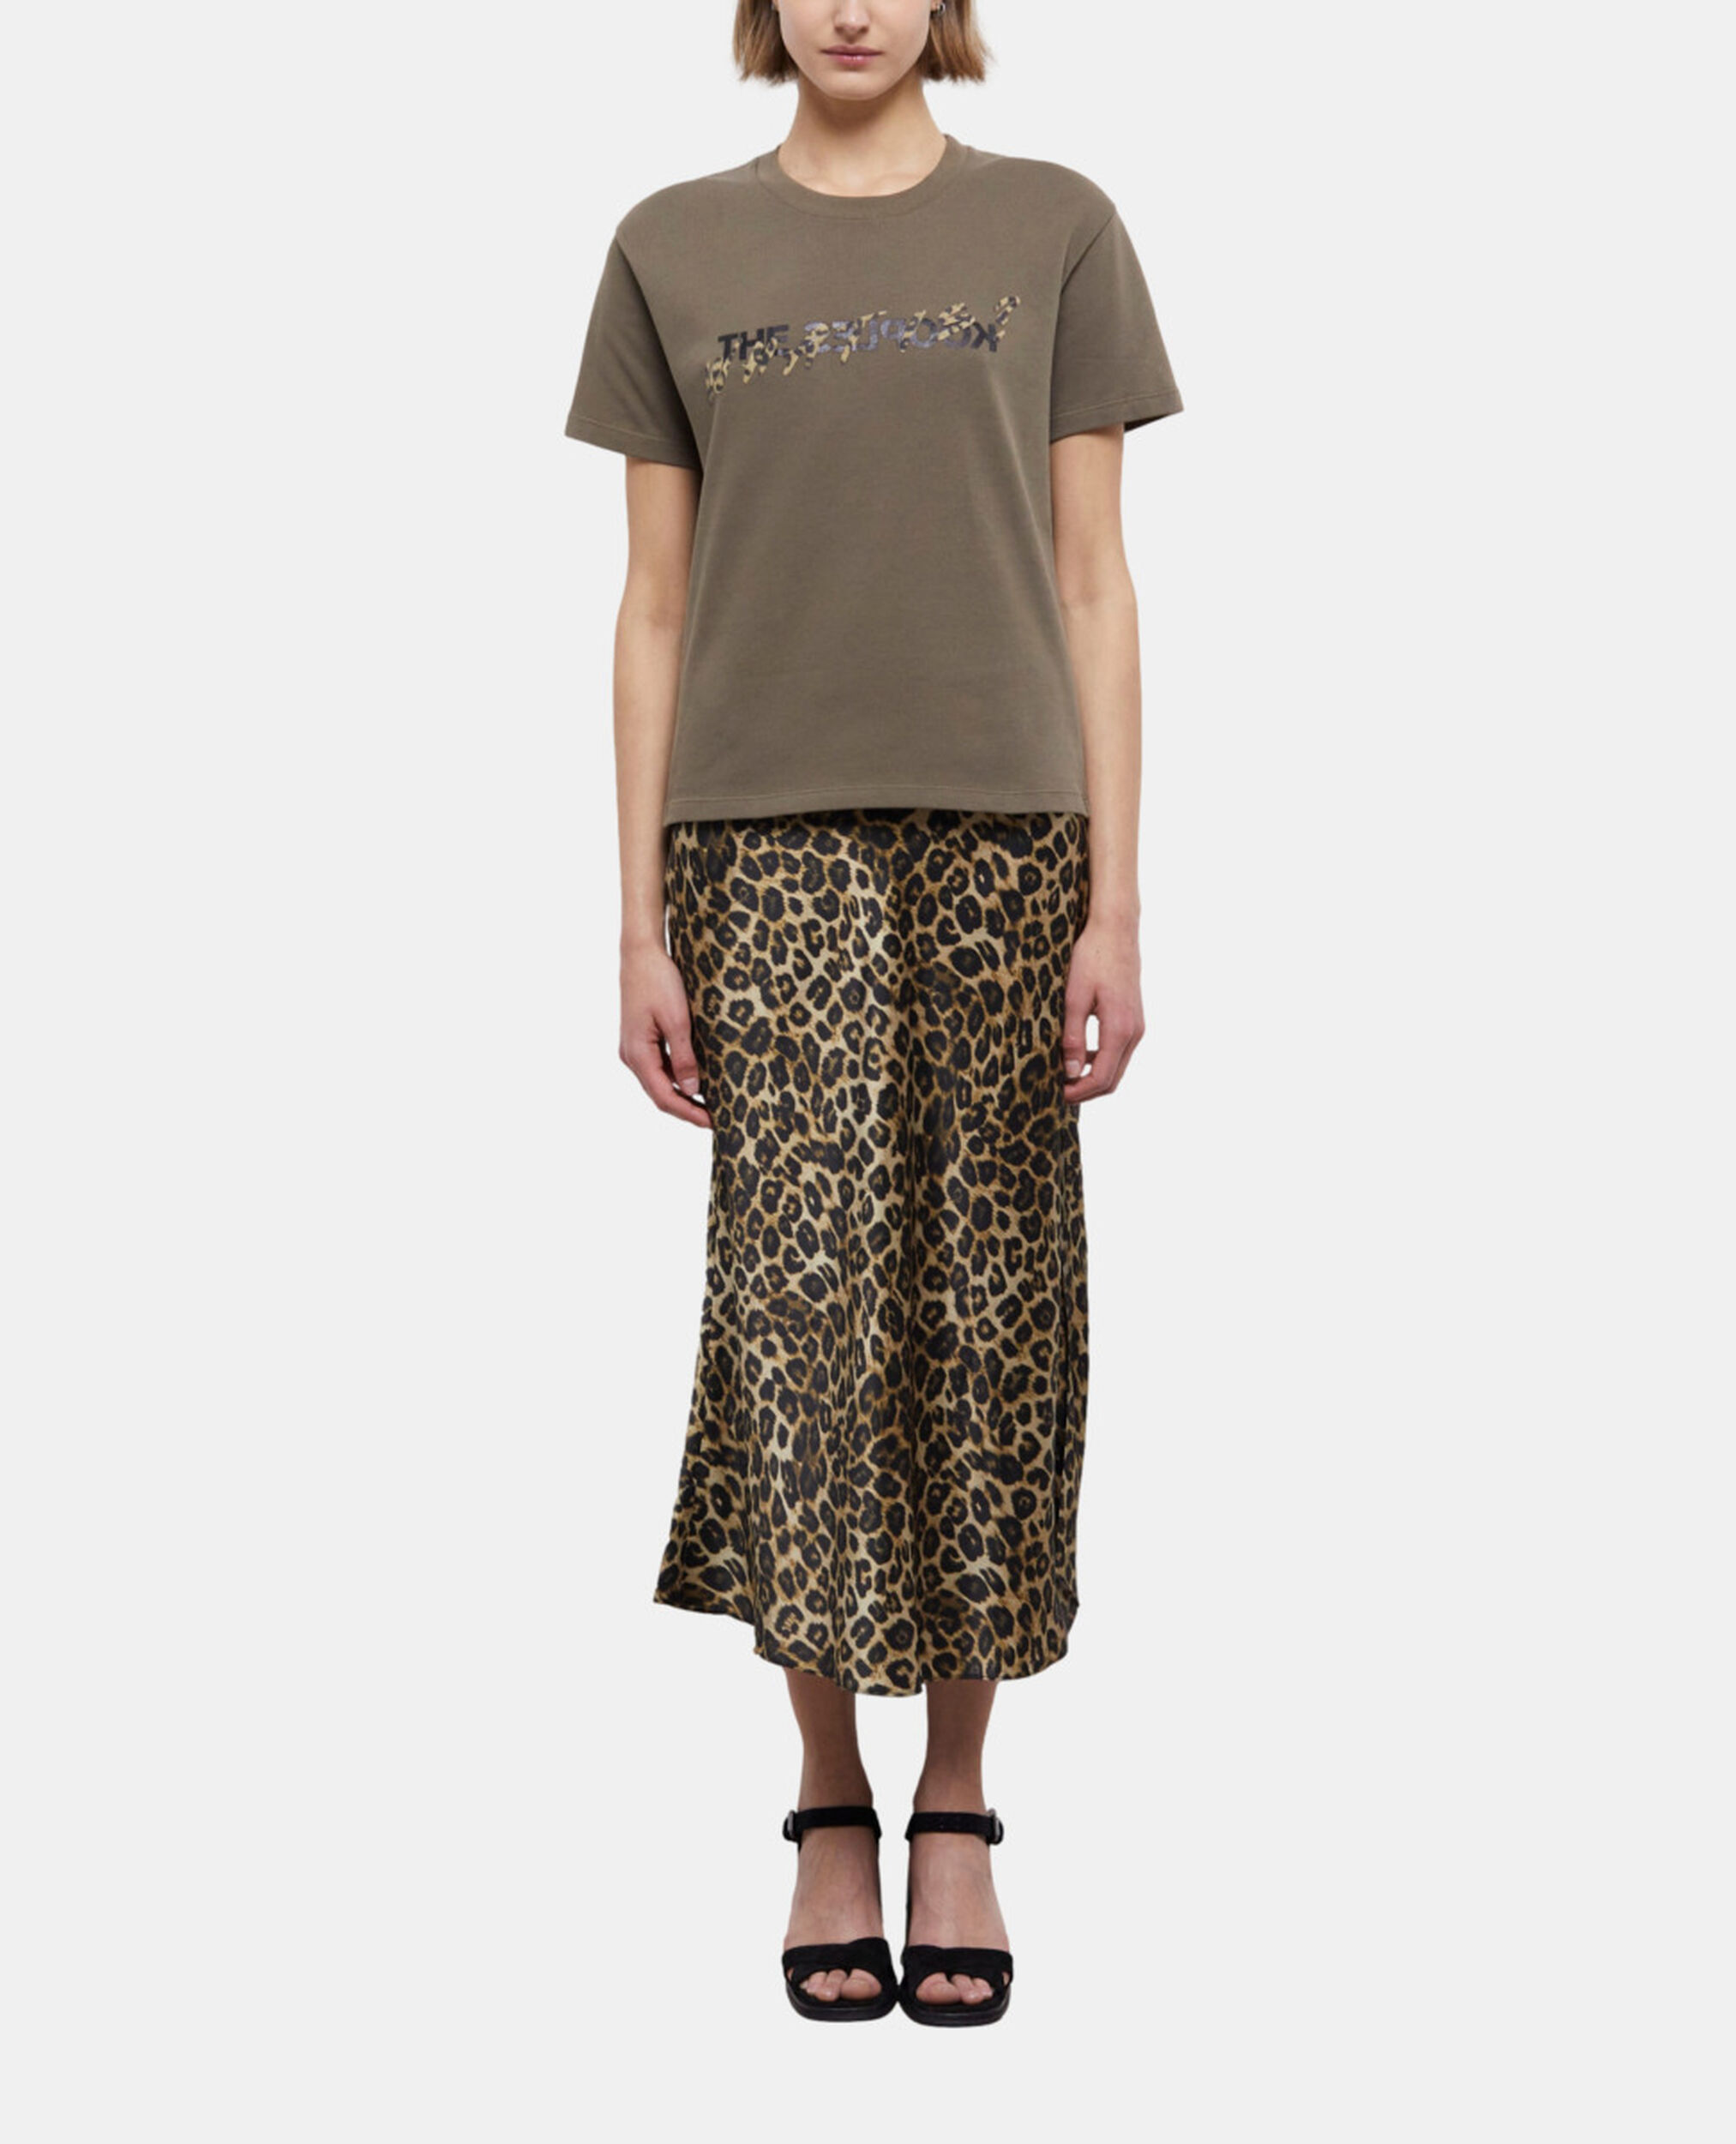 Women's khaki and leopard print what is t-shirt, ALGUE, hi-res image number null